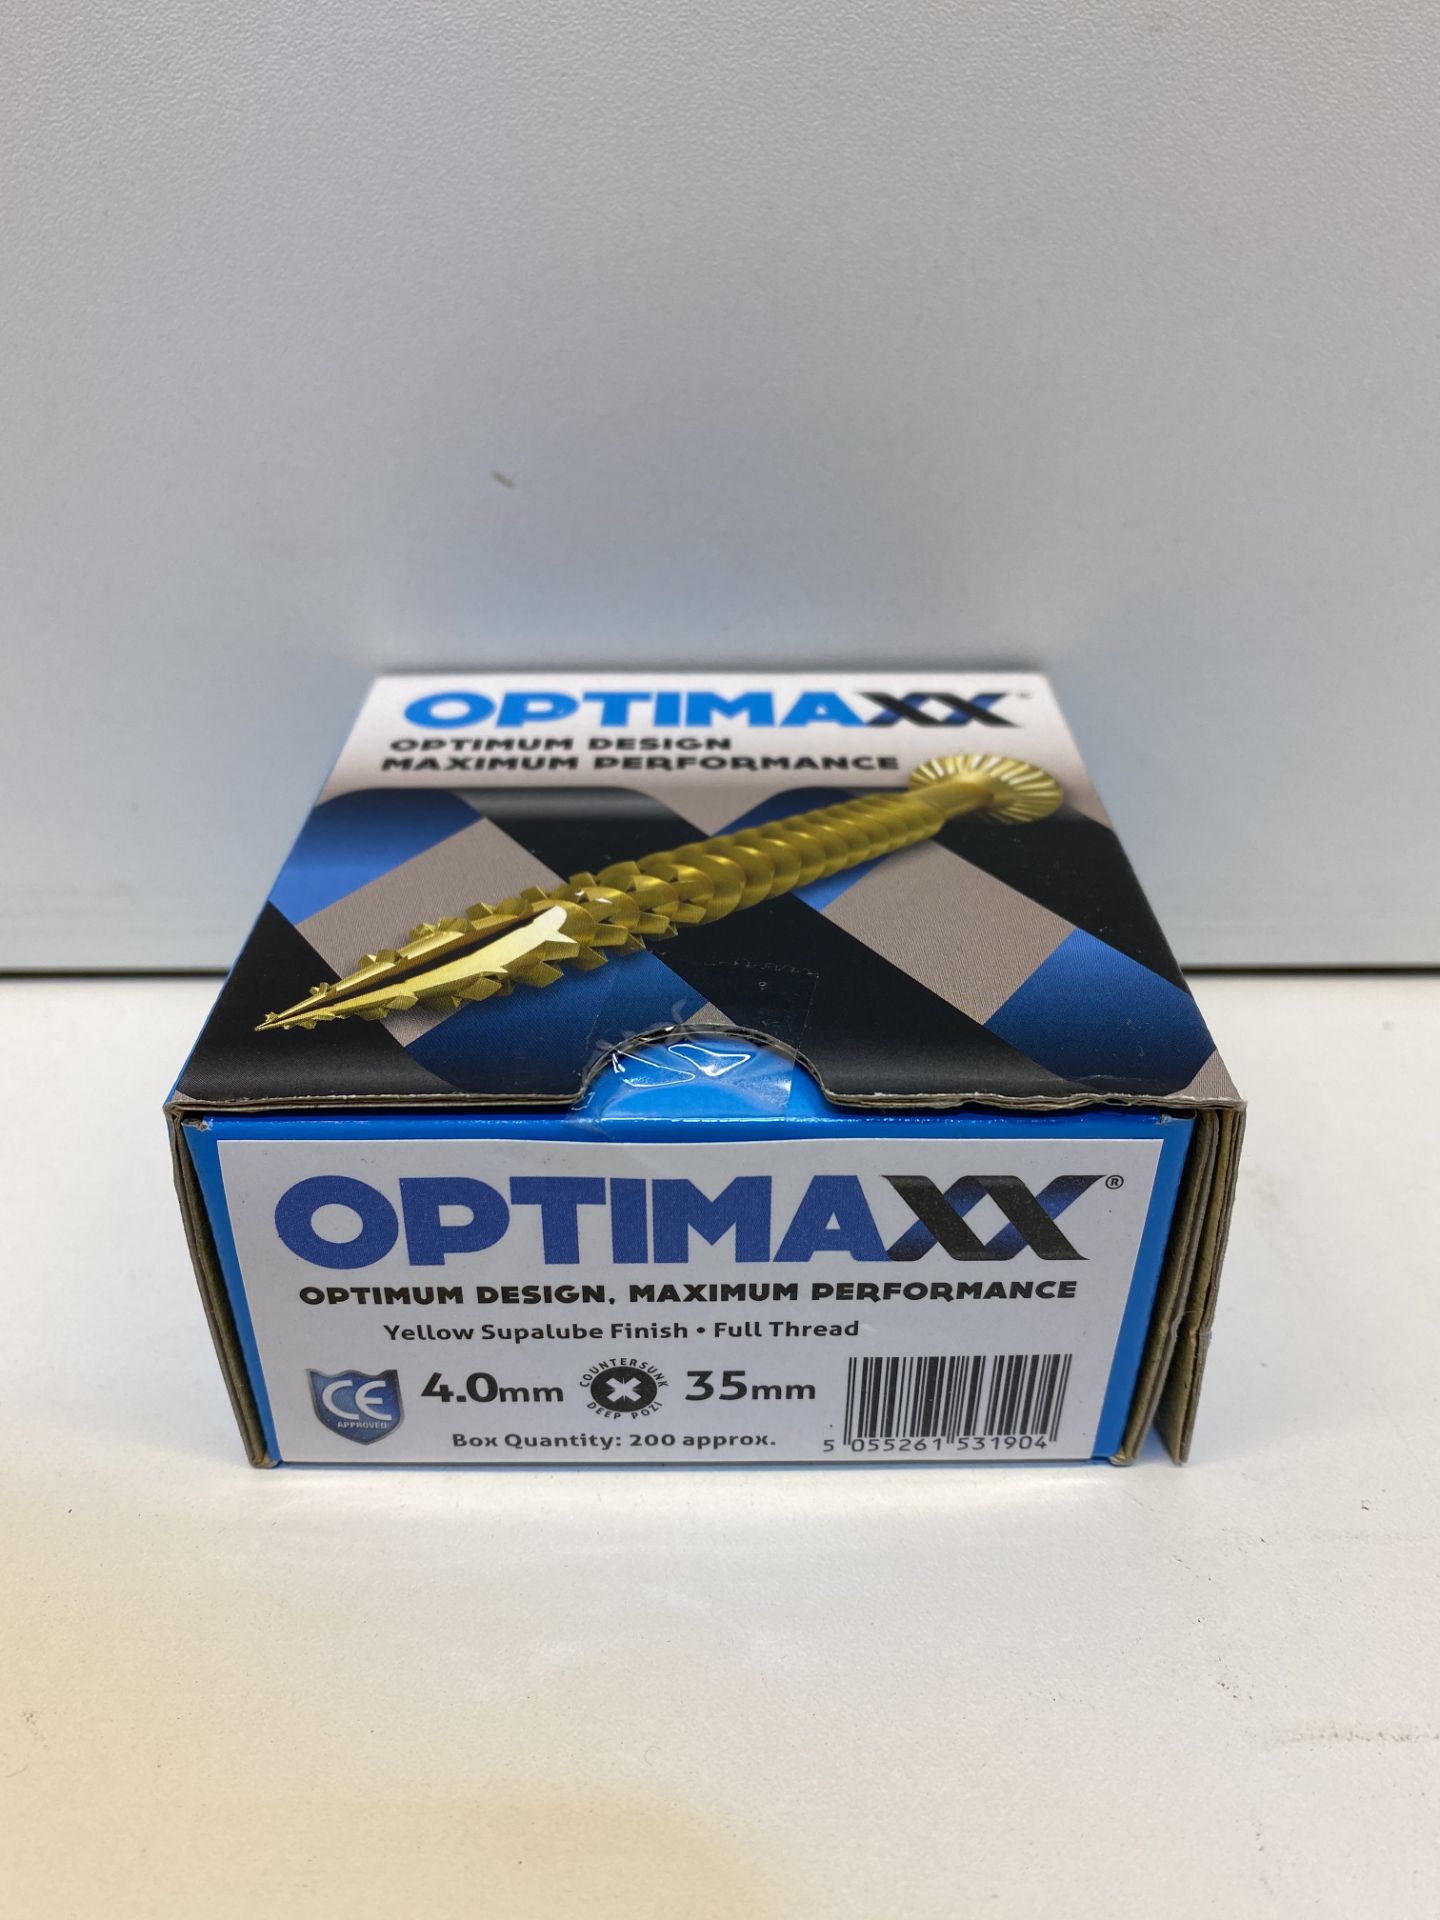 Optimaxx Wood Screw Selection in Case + Tape Measure - Image 11 of 12